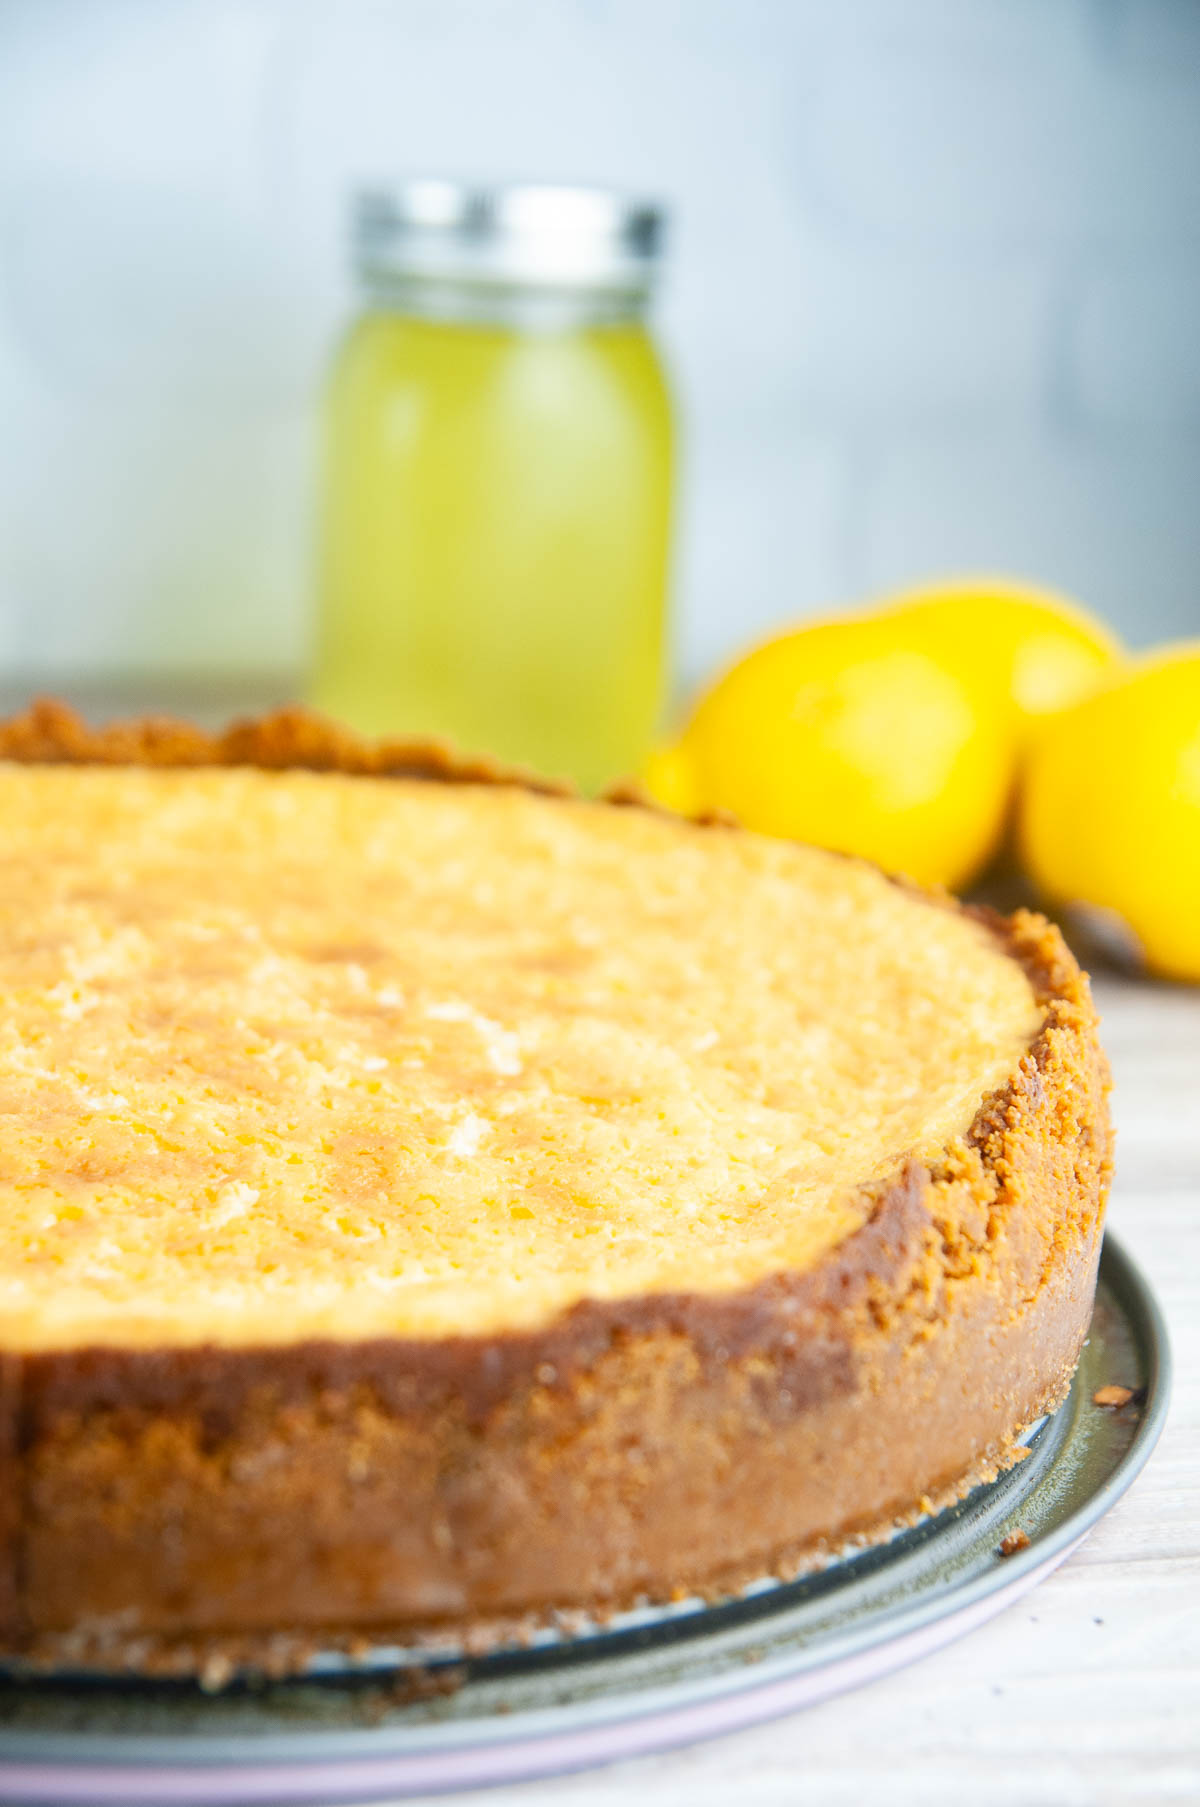 Graham cracker crust on a limoncello cheesecake